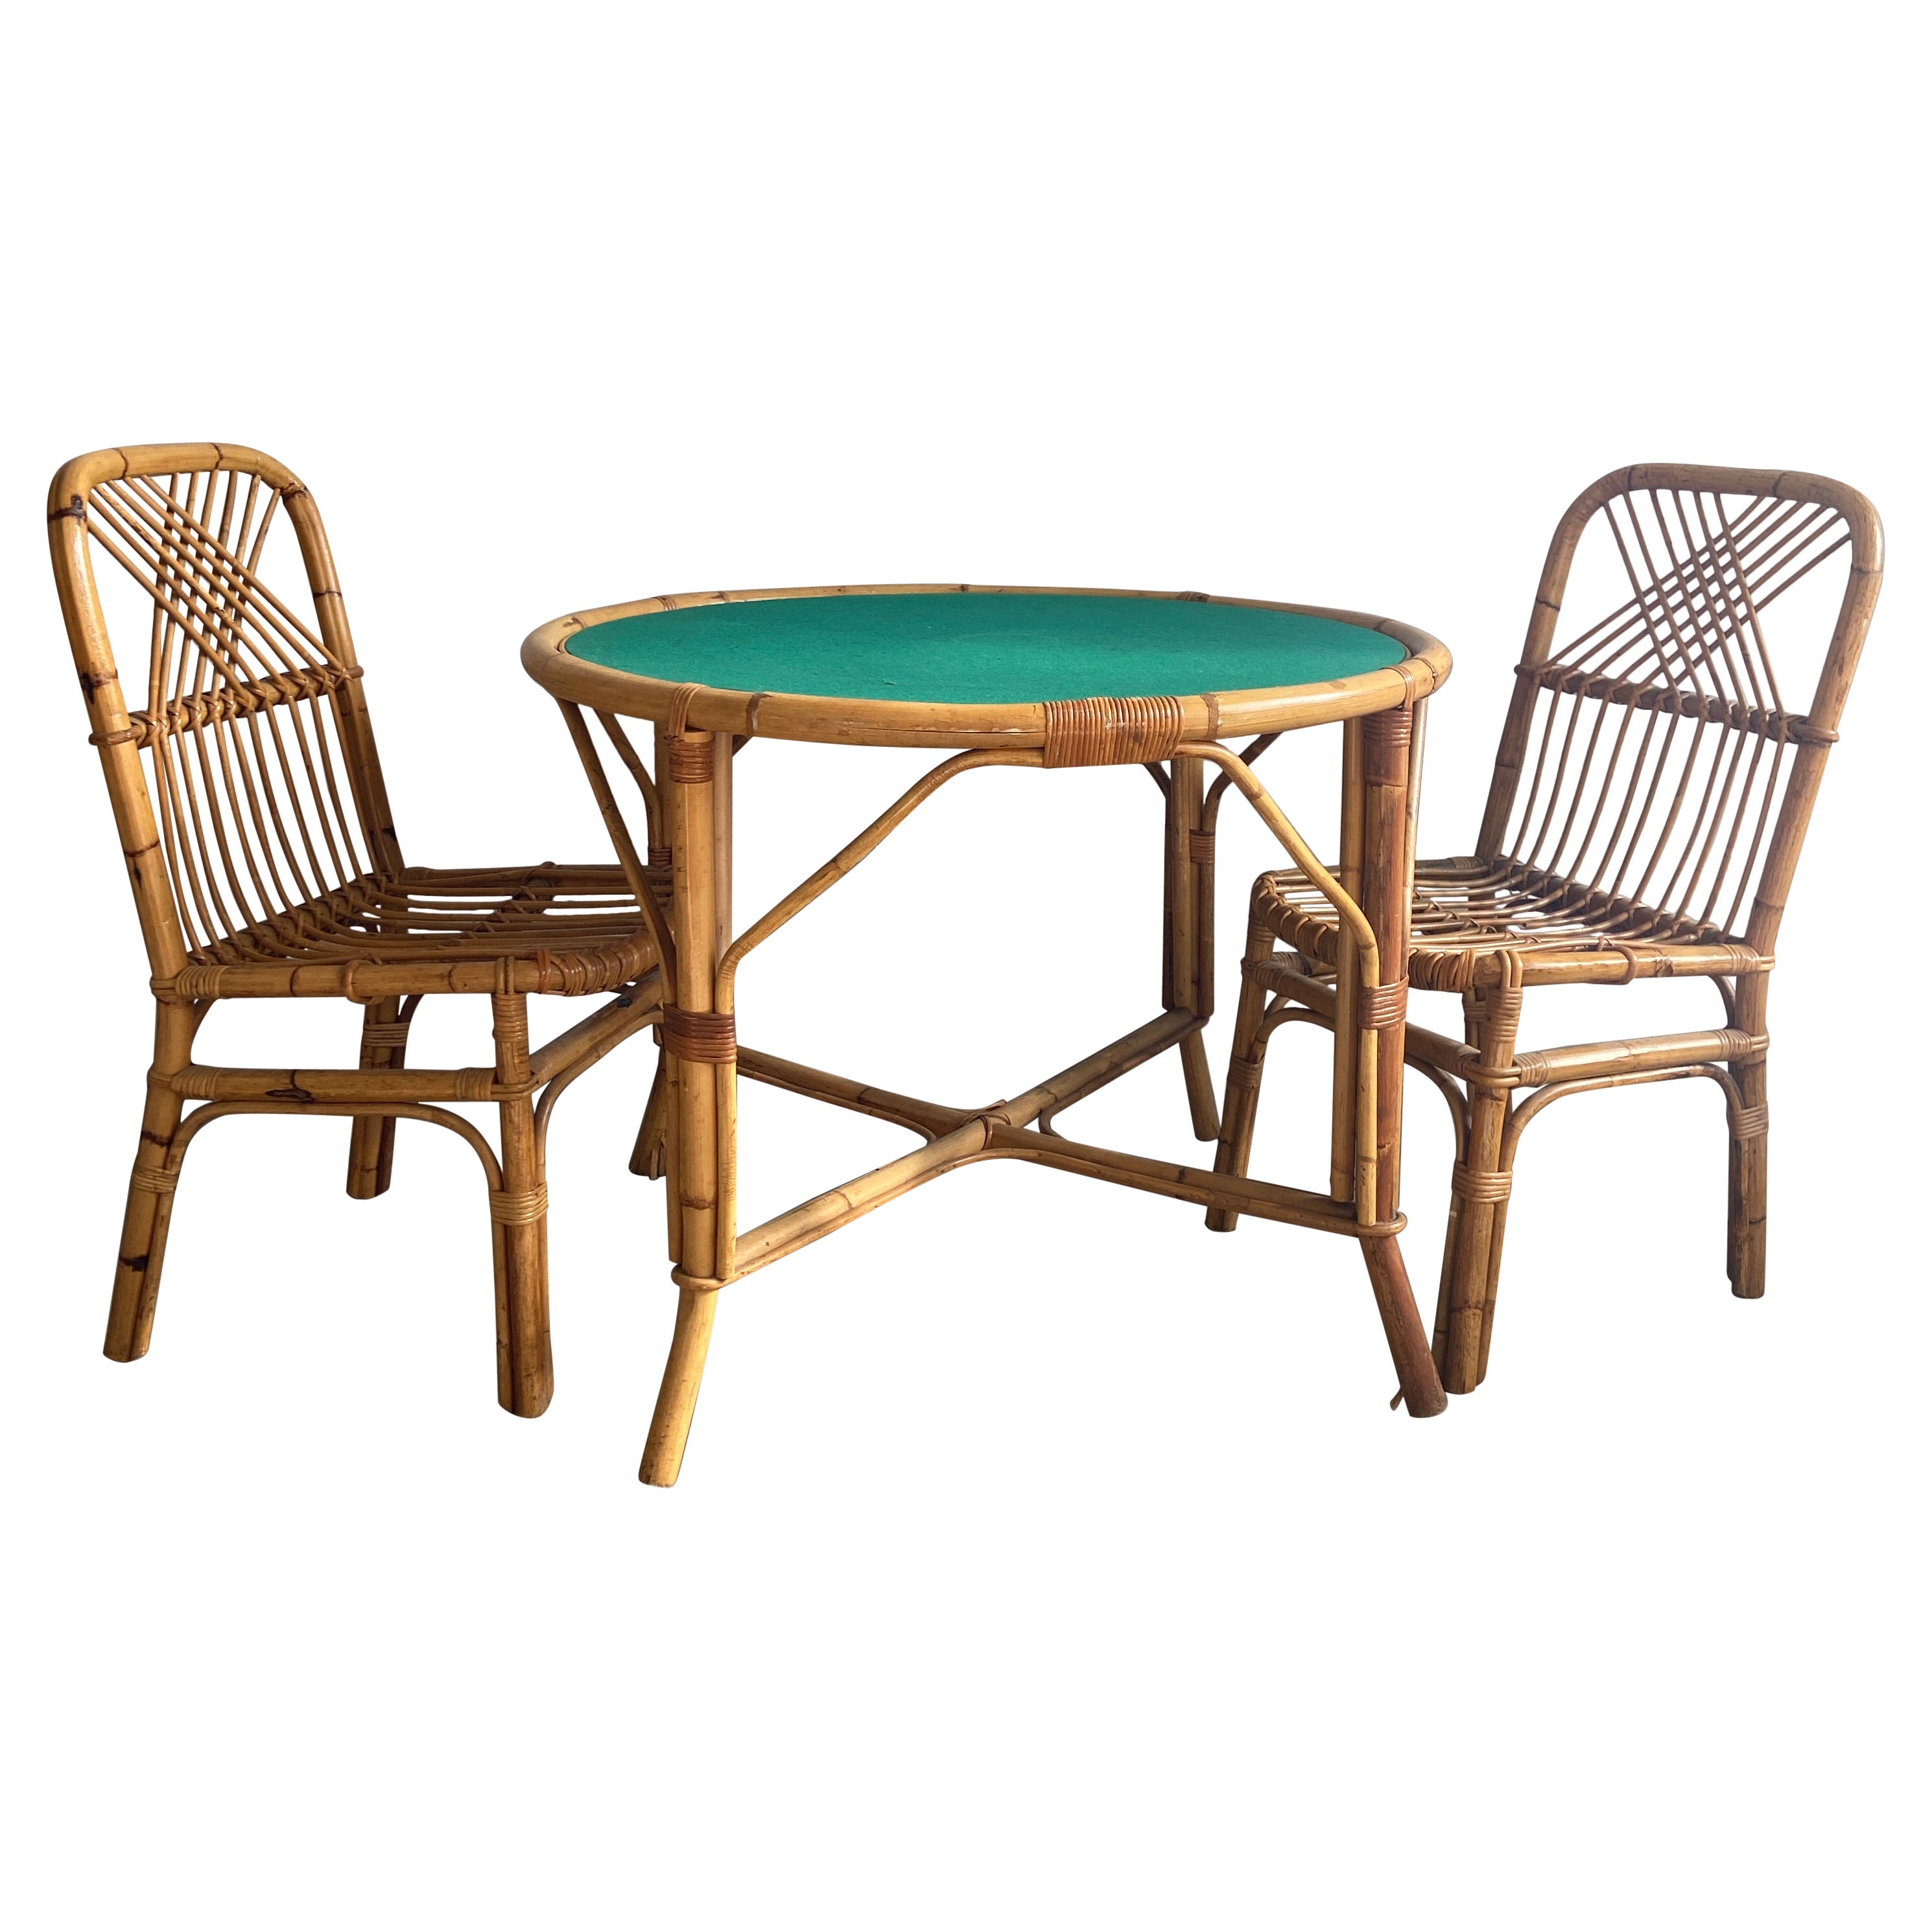 Mid-Century Modern Italian Bamboo Game Table Set with 2 Chairs, 1970s